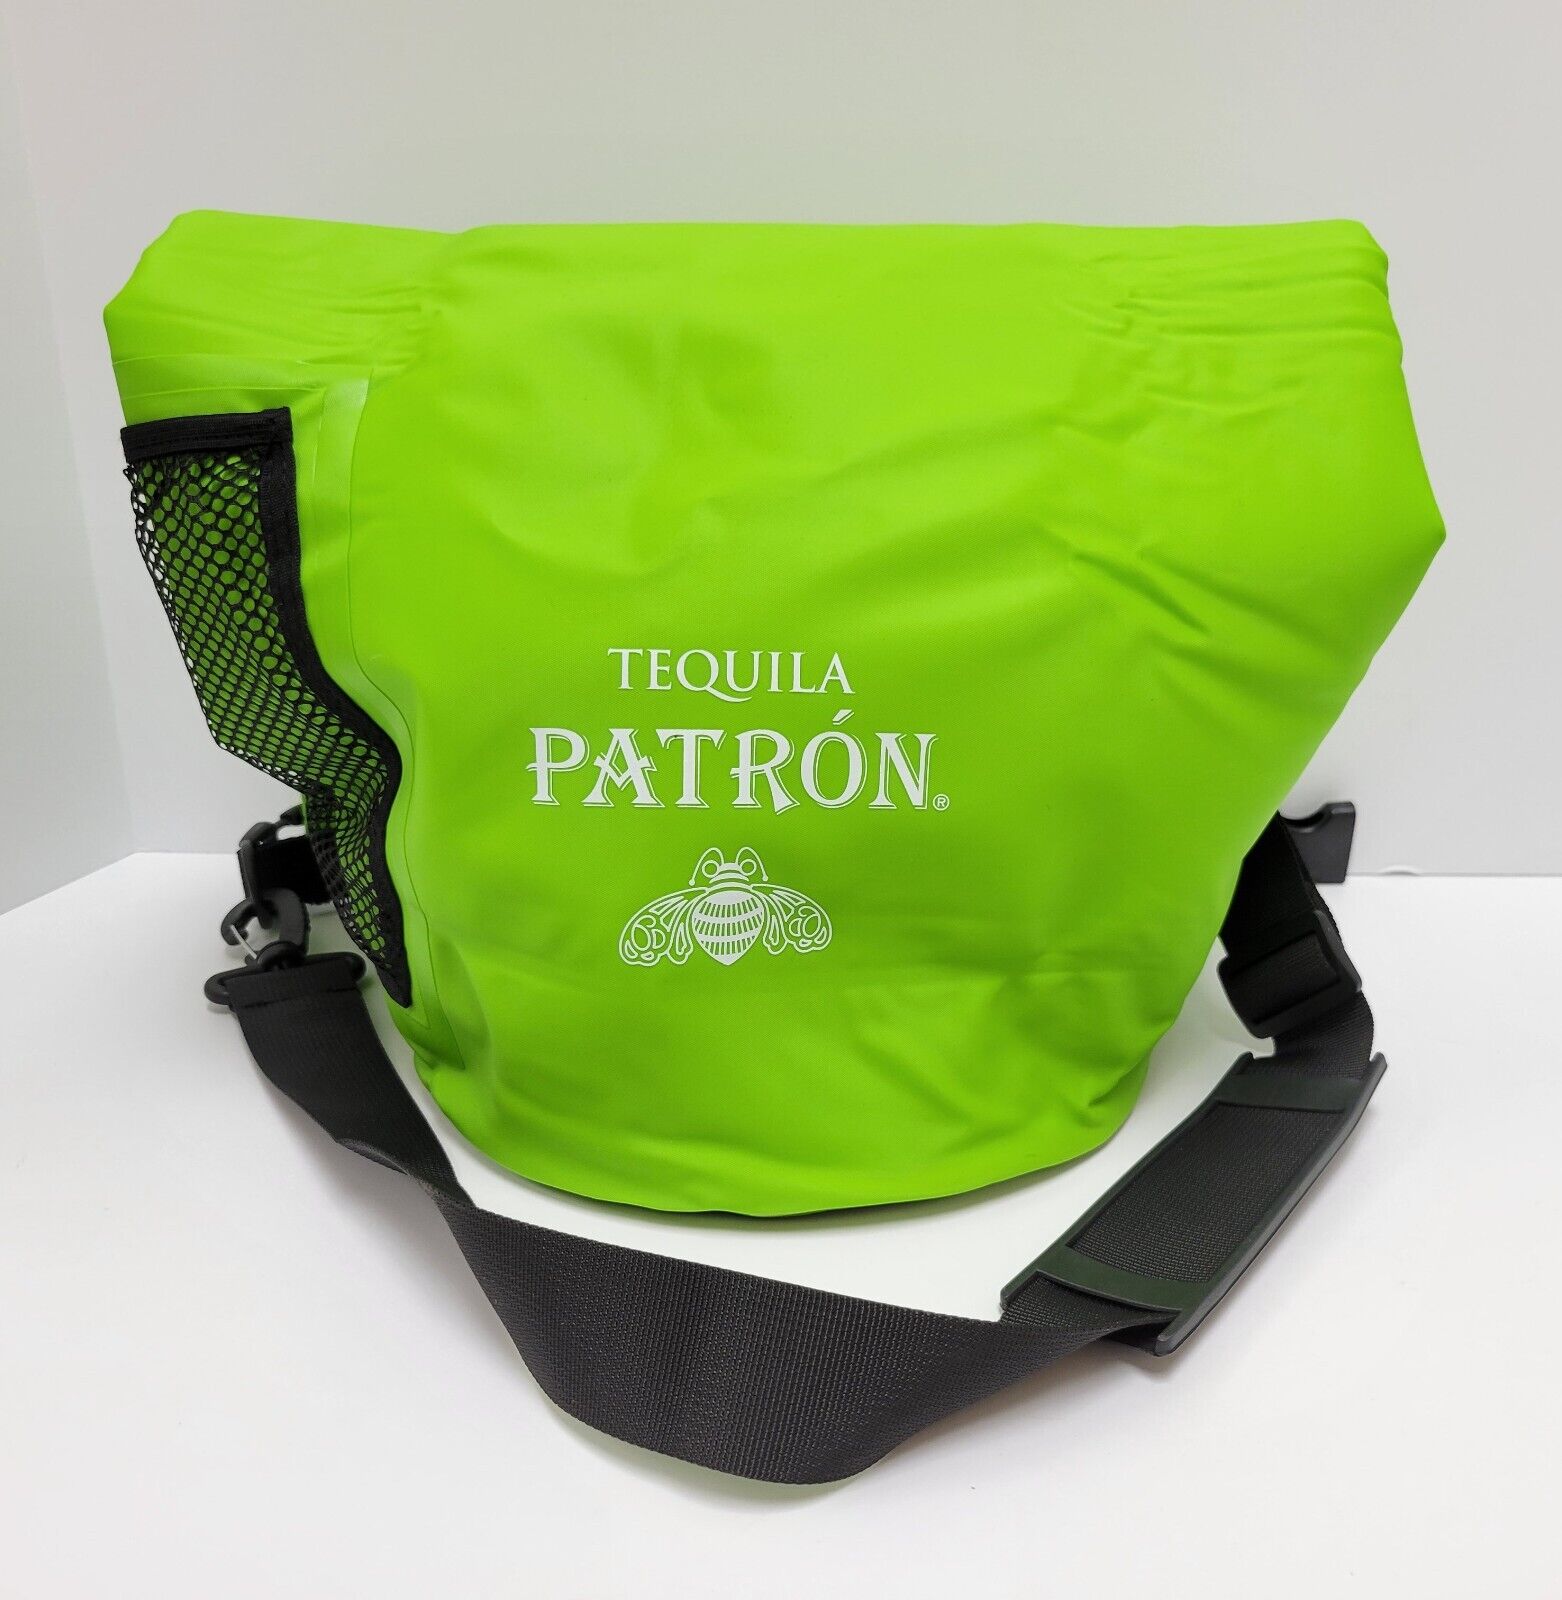 NEW Patron Tequila Branded Advertising Dry Bag Insulated Cooler Backpack Tote